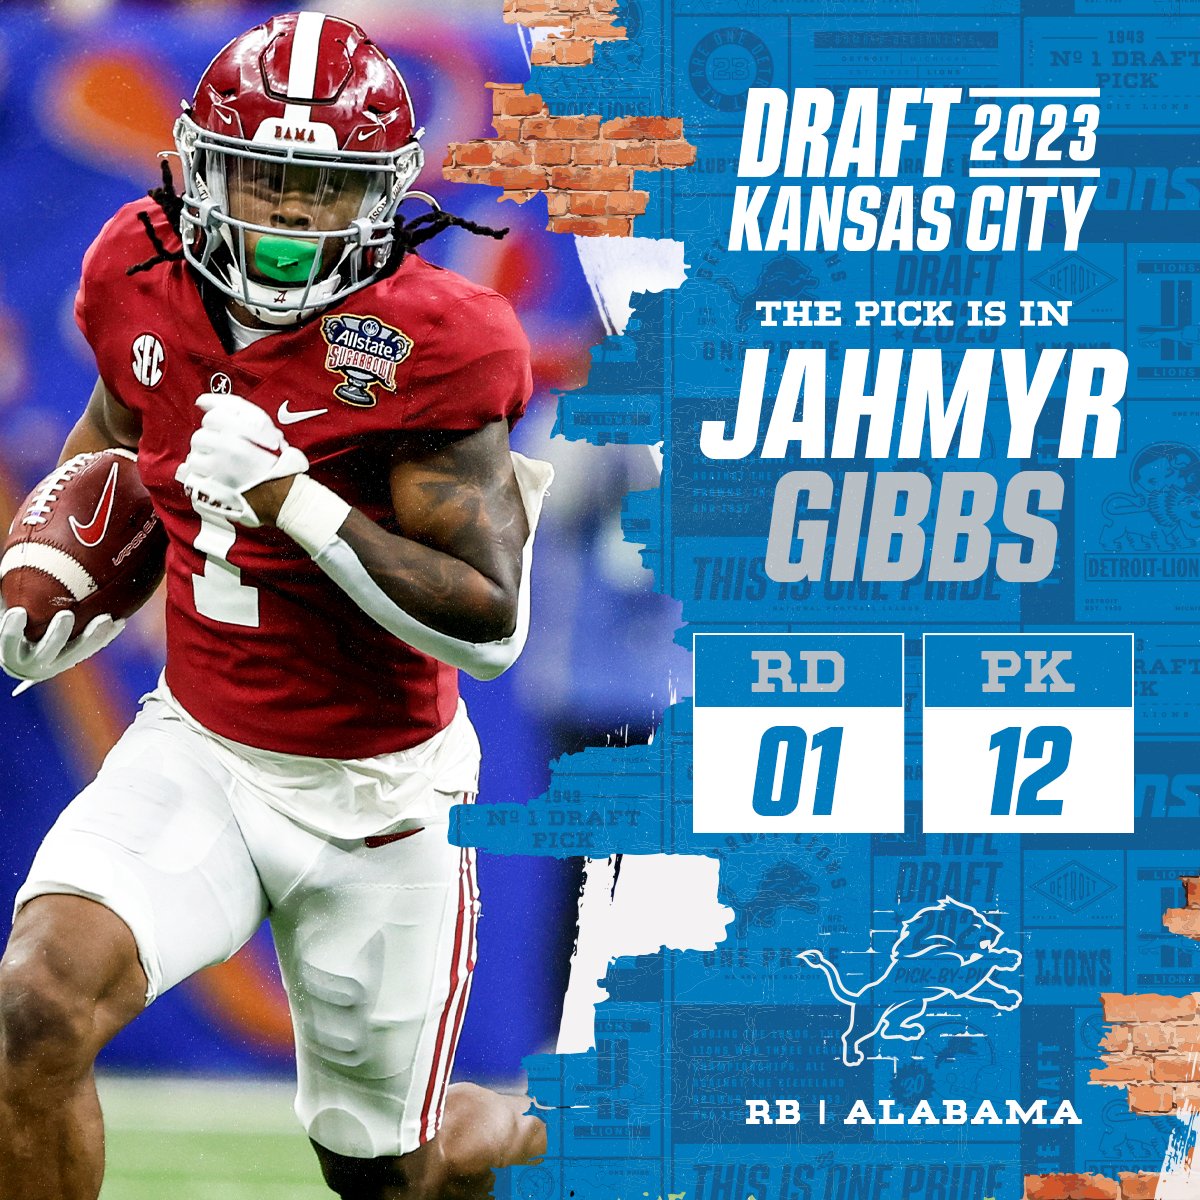 With the No. 12 overall pick in the 2023 @NFLDraft, the @Lions select Jahmyr Gibbs! @NewEraCap | #OnePride 📺: 2023 #NFLDraft on NFLN/ESPN/ABC 📱: Stream on NFL+ bit.ly/3Nk9PrV